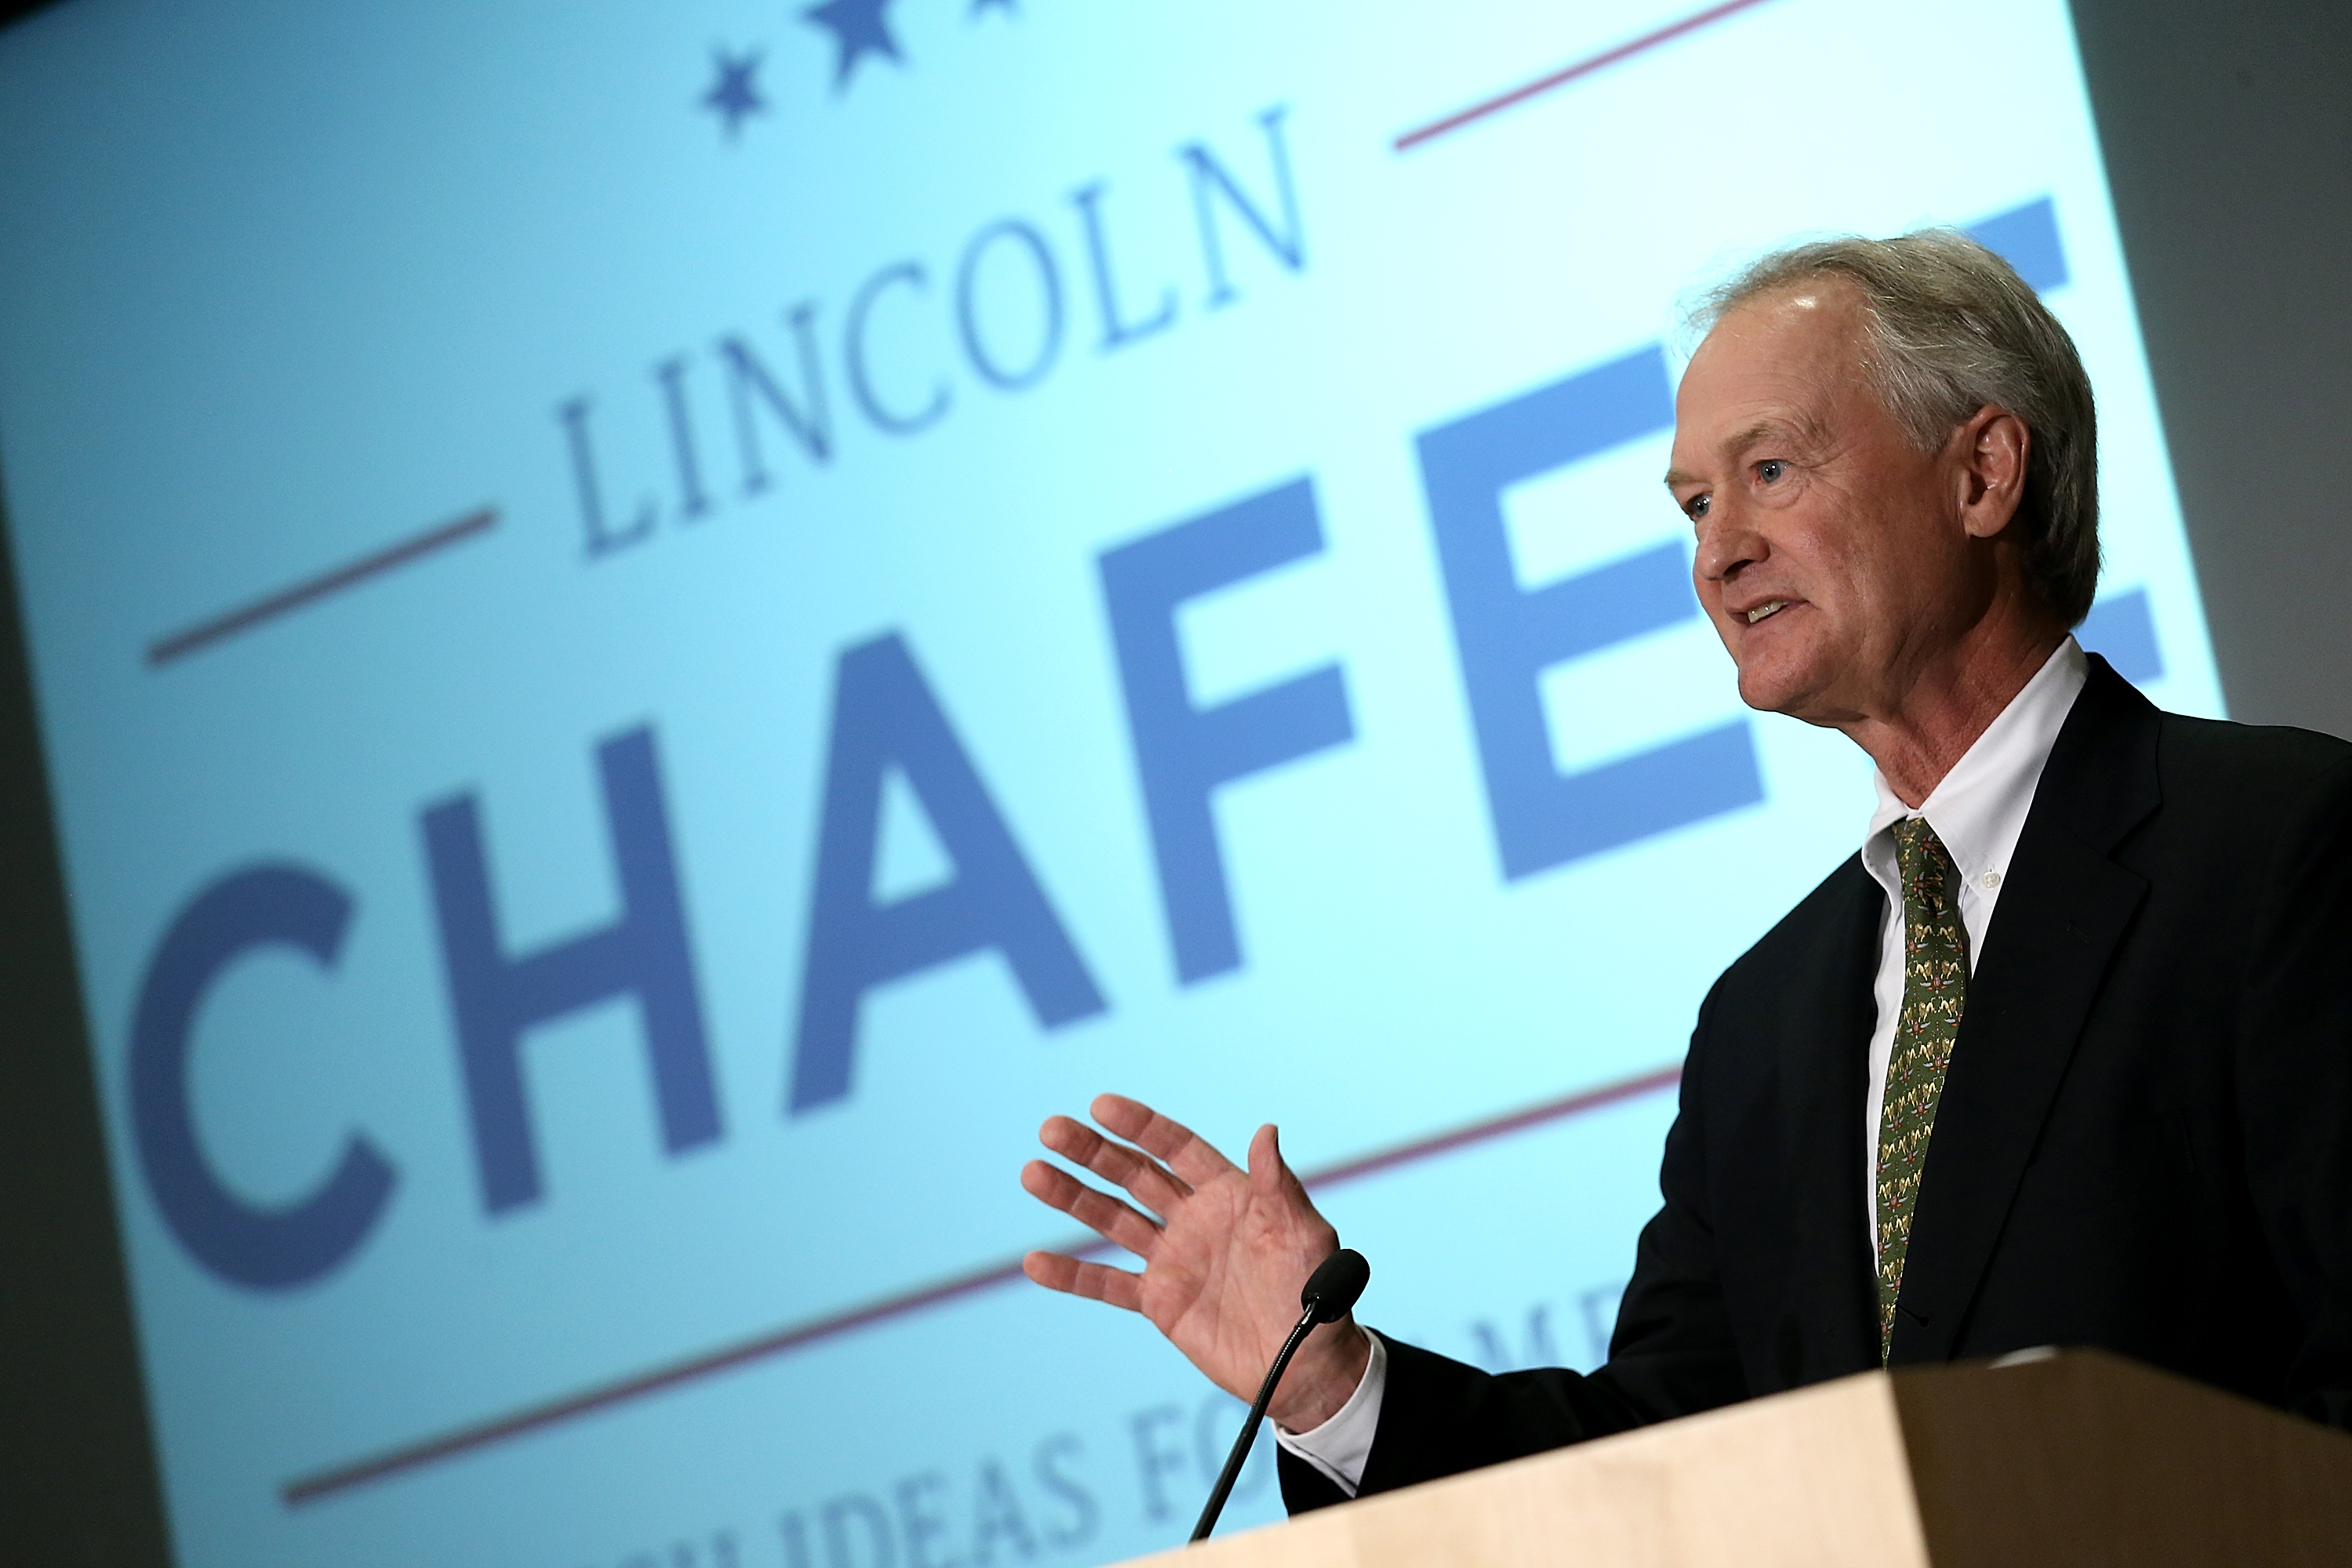 Sen. Lincoln Chafee Enters Presidential Race